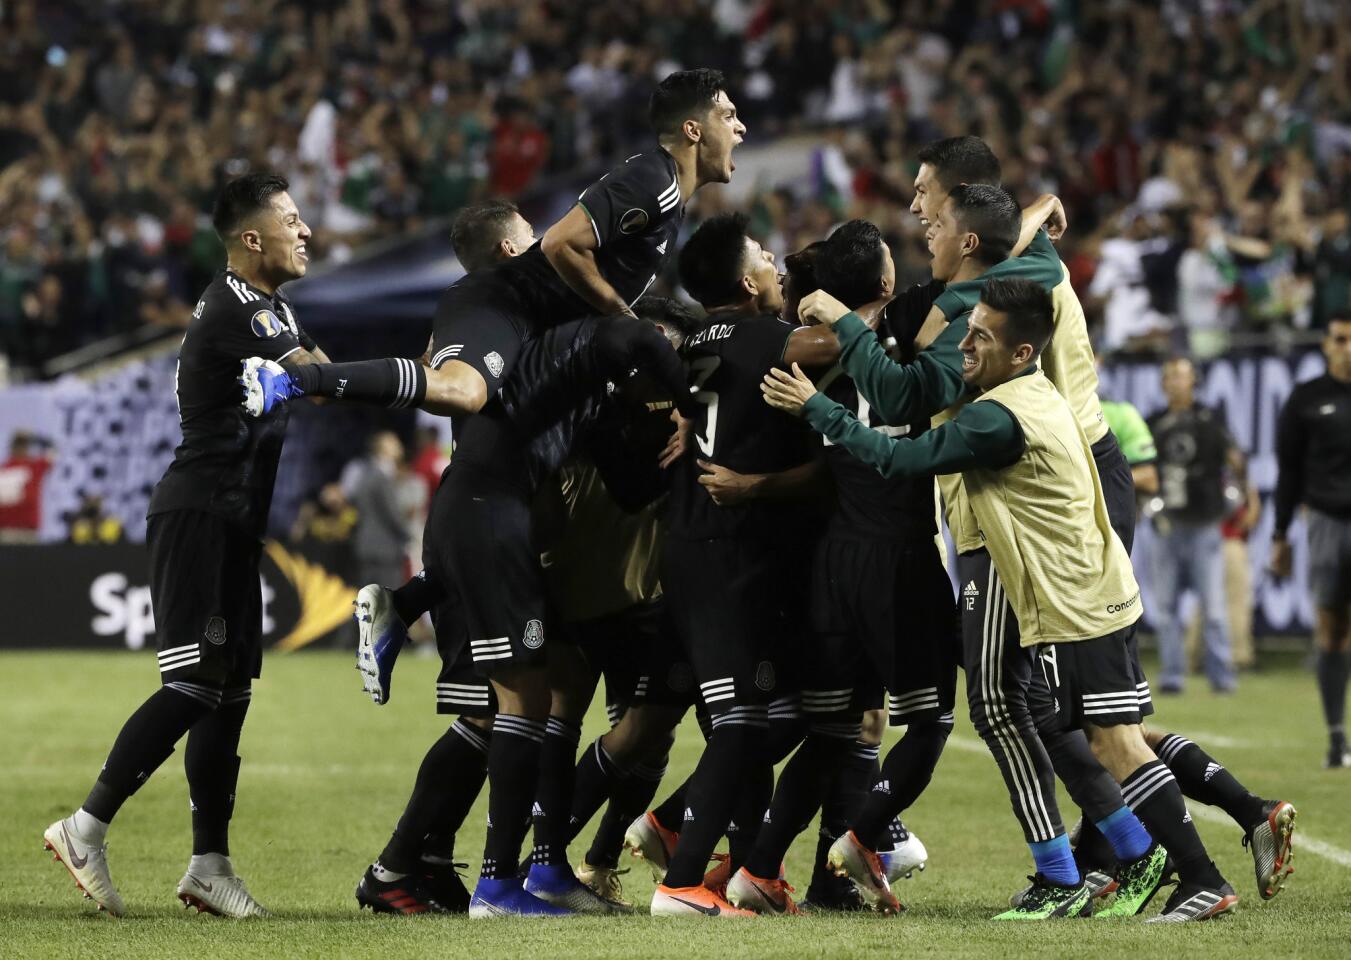 Mexico midfielder Jonathan Dos Santos (6) celebrates with teammates after scoring his first goal against the United States during the second half of the CONCACAF Gold Cup final soccer match in Chicago, Sunday, July 7, 2019.